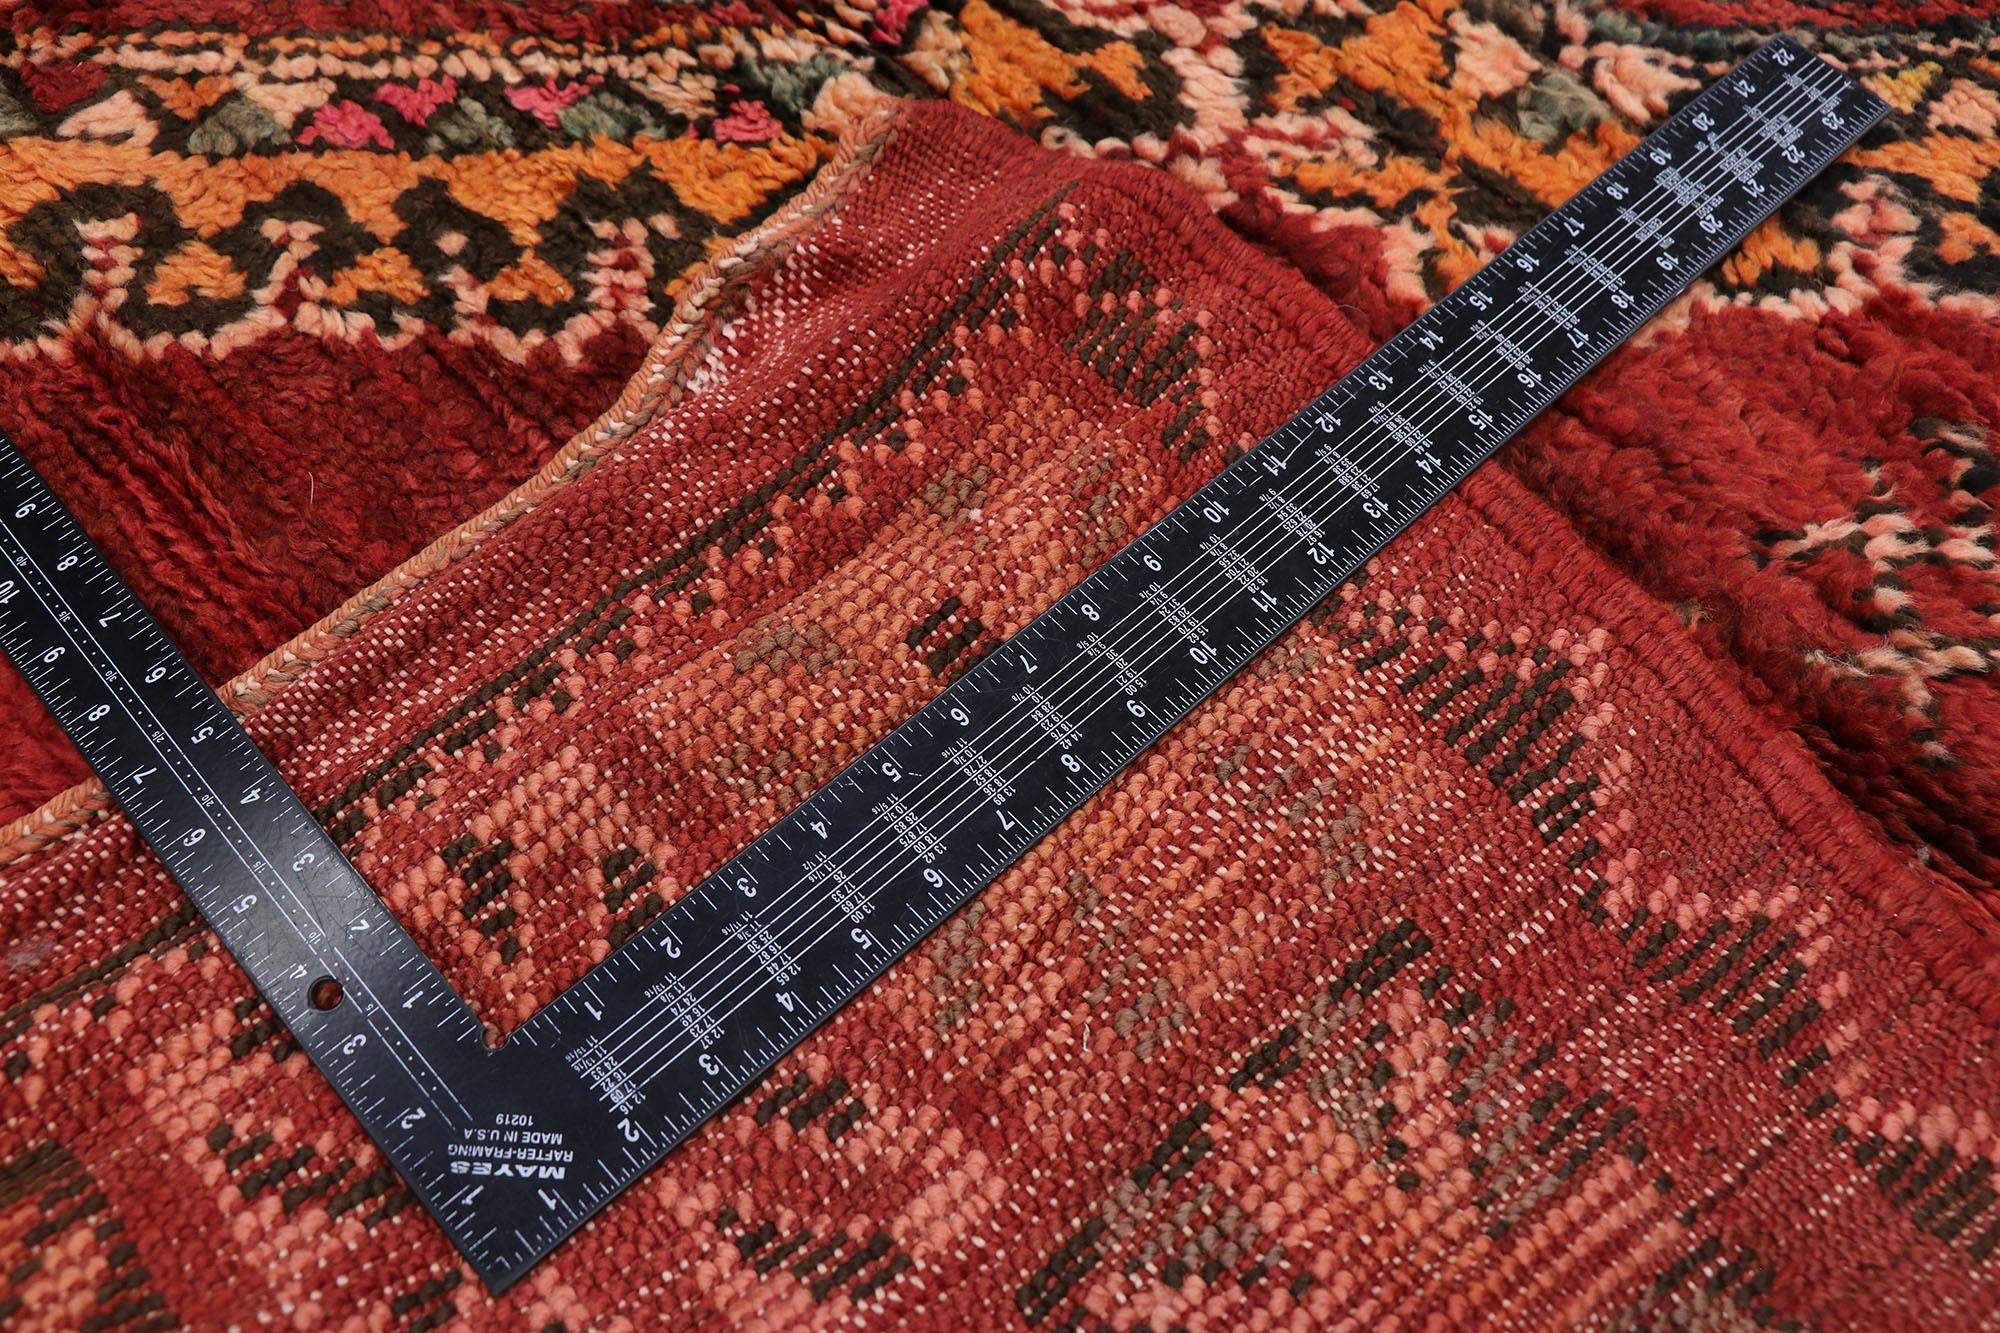 Vintage Red Boujad Moroccan Rug, Boho Jungalow Meets Nomadic Charm In Good Condition For Sale In Dallas, TX